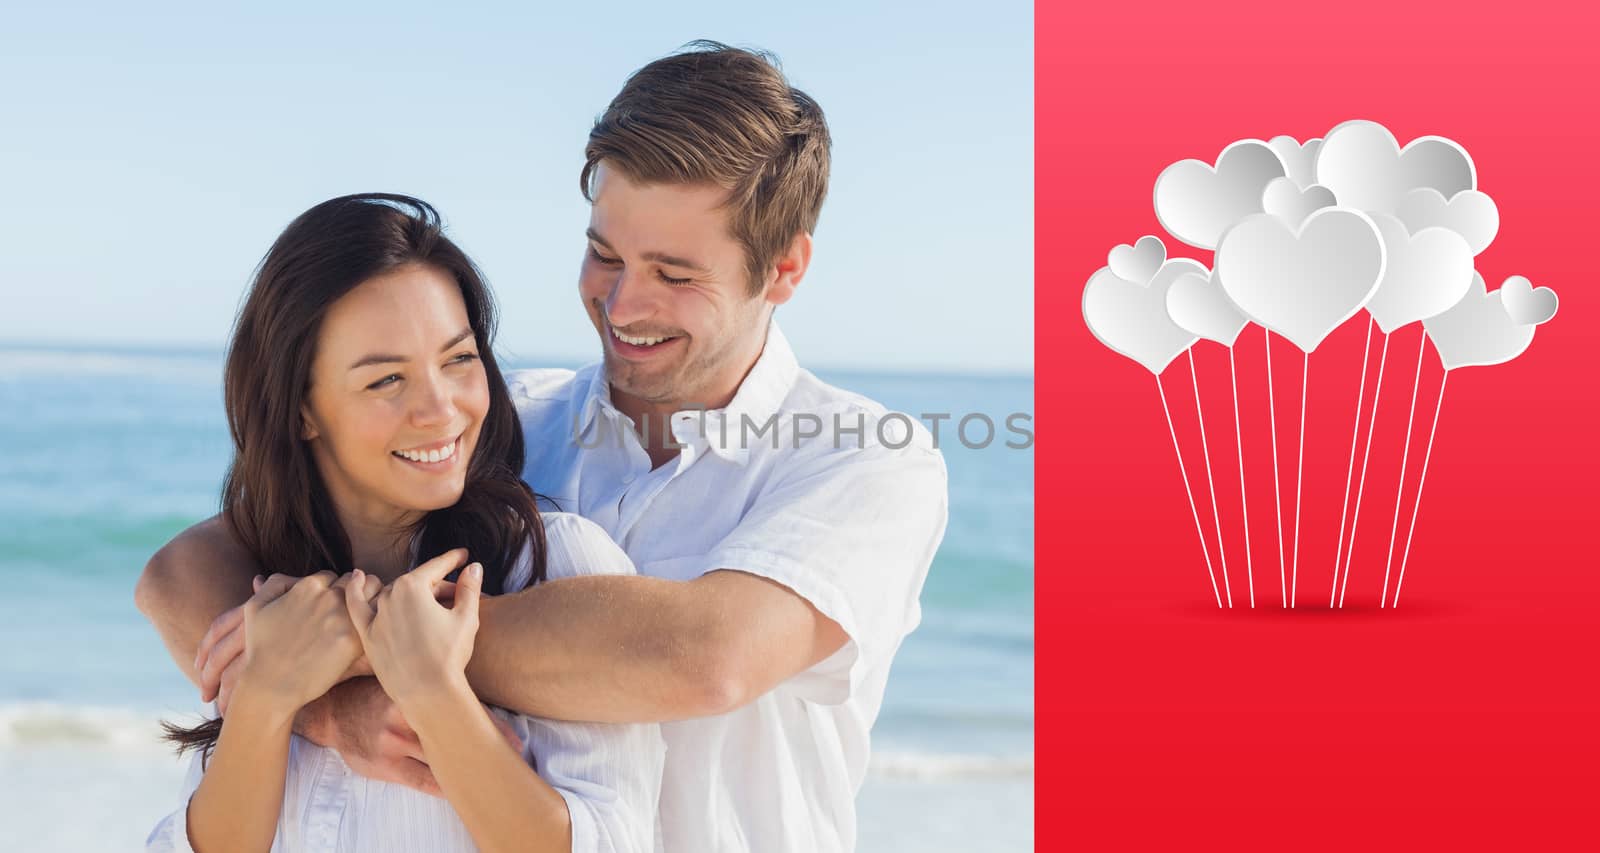 Cheerful couple relaxing on the beach during summer against hearts